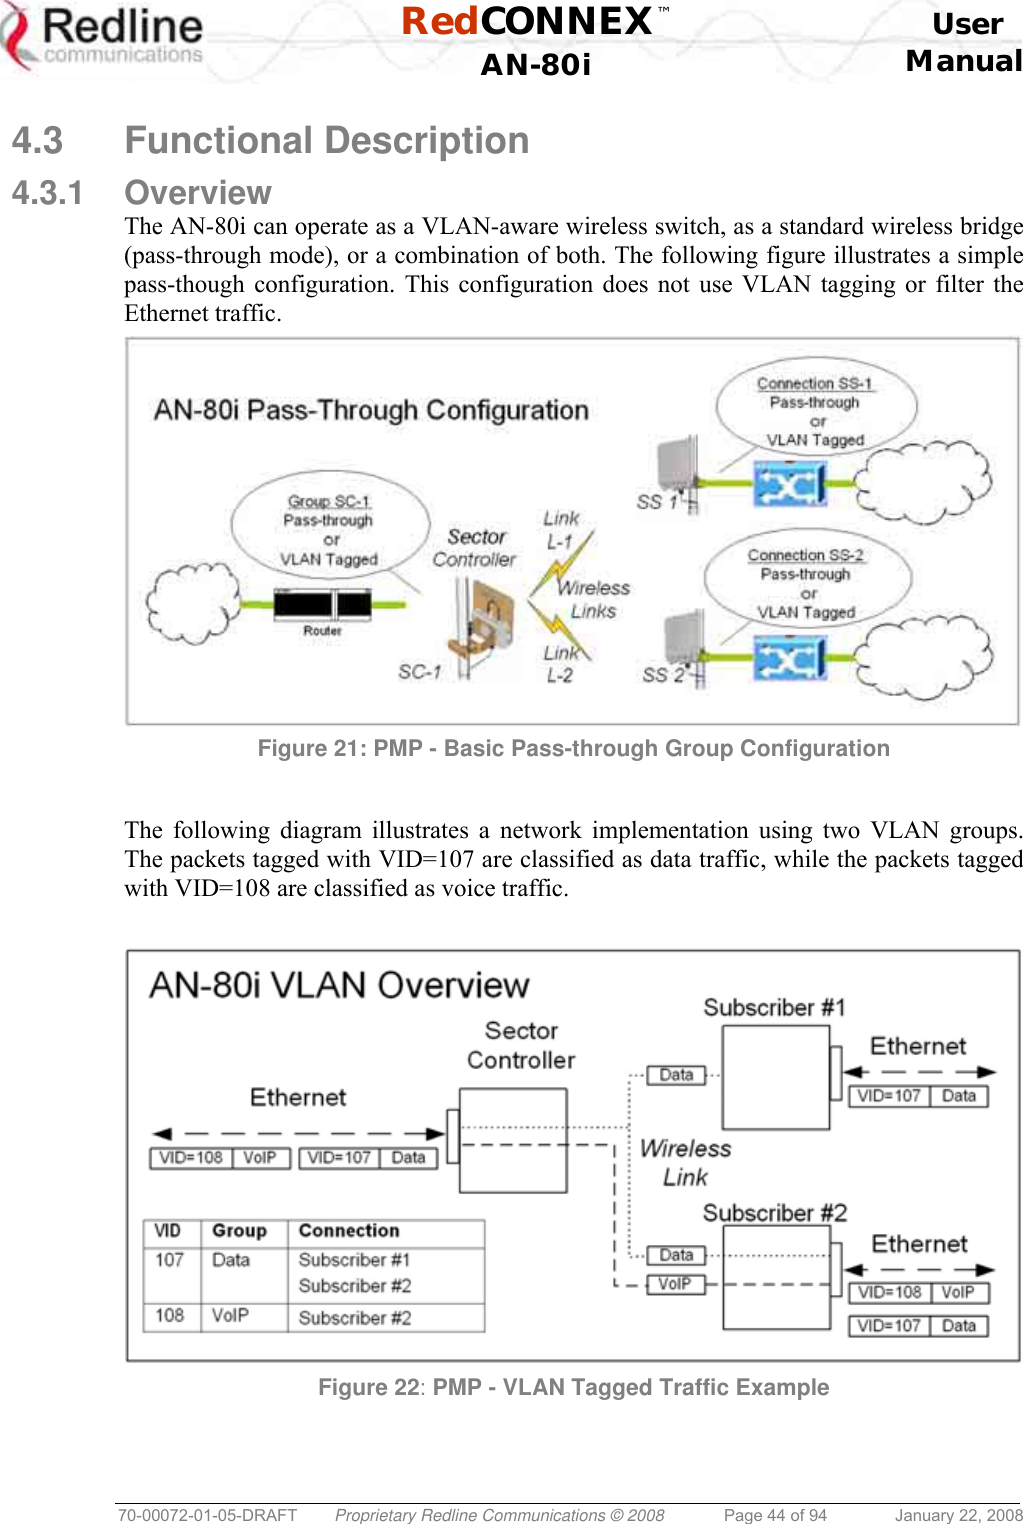  RedCONNEX™    User  AN-80i Manual  70-00072-01-05-DRAFT  Proprietary Redline Communications © 2008  Page 44 of 94  January 22, 2008  4.3 Functional Description 4.3.1 Overview The AN-80i can operate as a VLAN-aware wireless switch, as a standard wireless bridge (pass-through mode), or a combination of both. The following figure illustrates a simple pass-though configuration. This configuration does not use VLAN tagging or filter the Ethernet traffic.  Figure 21: PMP - Basic Pass-through Group Configuration   The following diagram illustrates a network implementation using two VLAN groups. The packets tagged with VID=107 are classified as data traffic, while the packets tagged with VID=108 are classified as voice traffic.    Figure 22: PMP - VLAN Tagged Traffic Example   